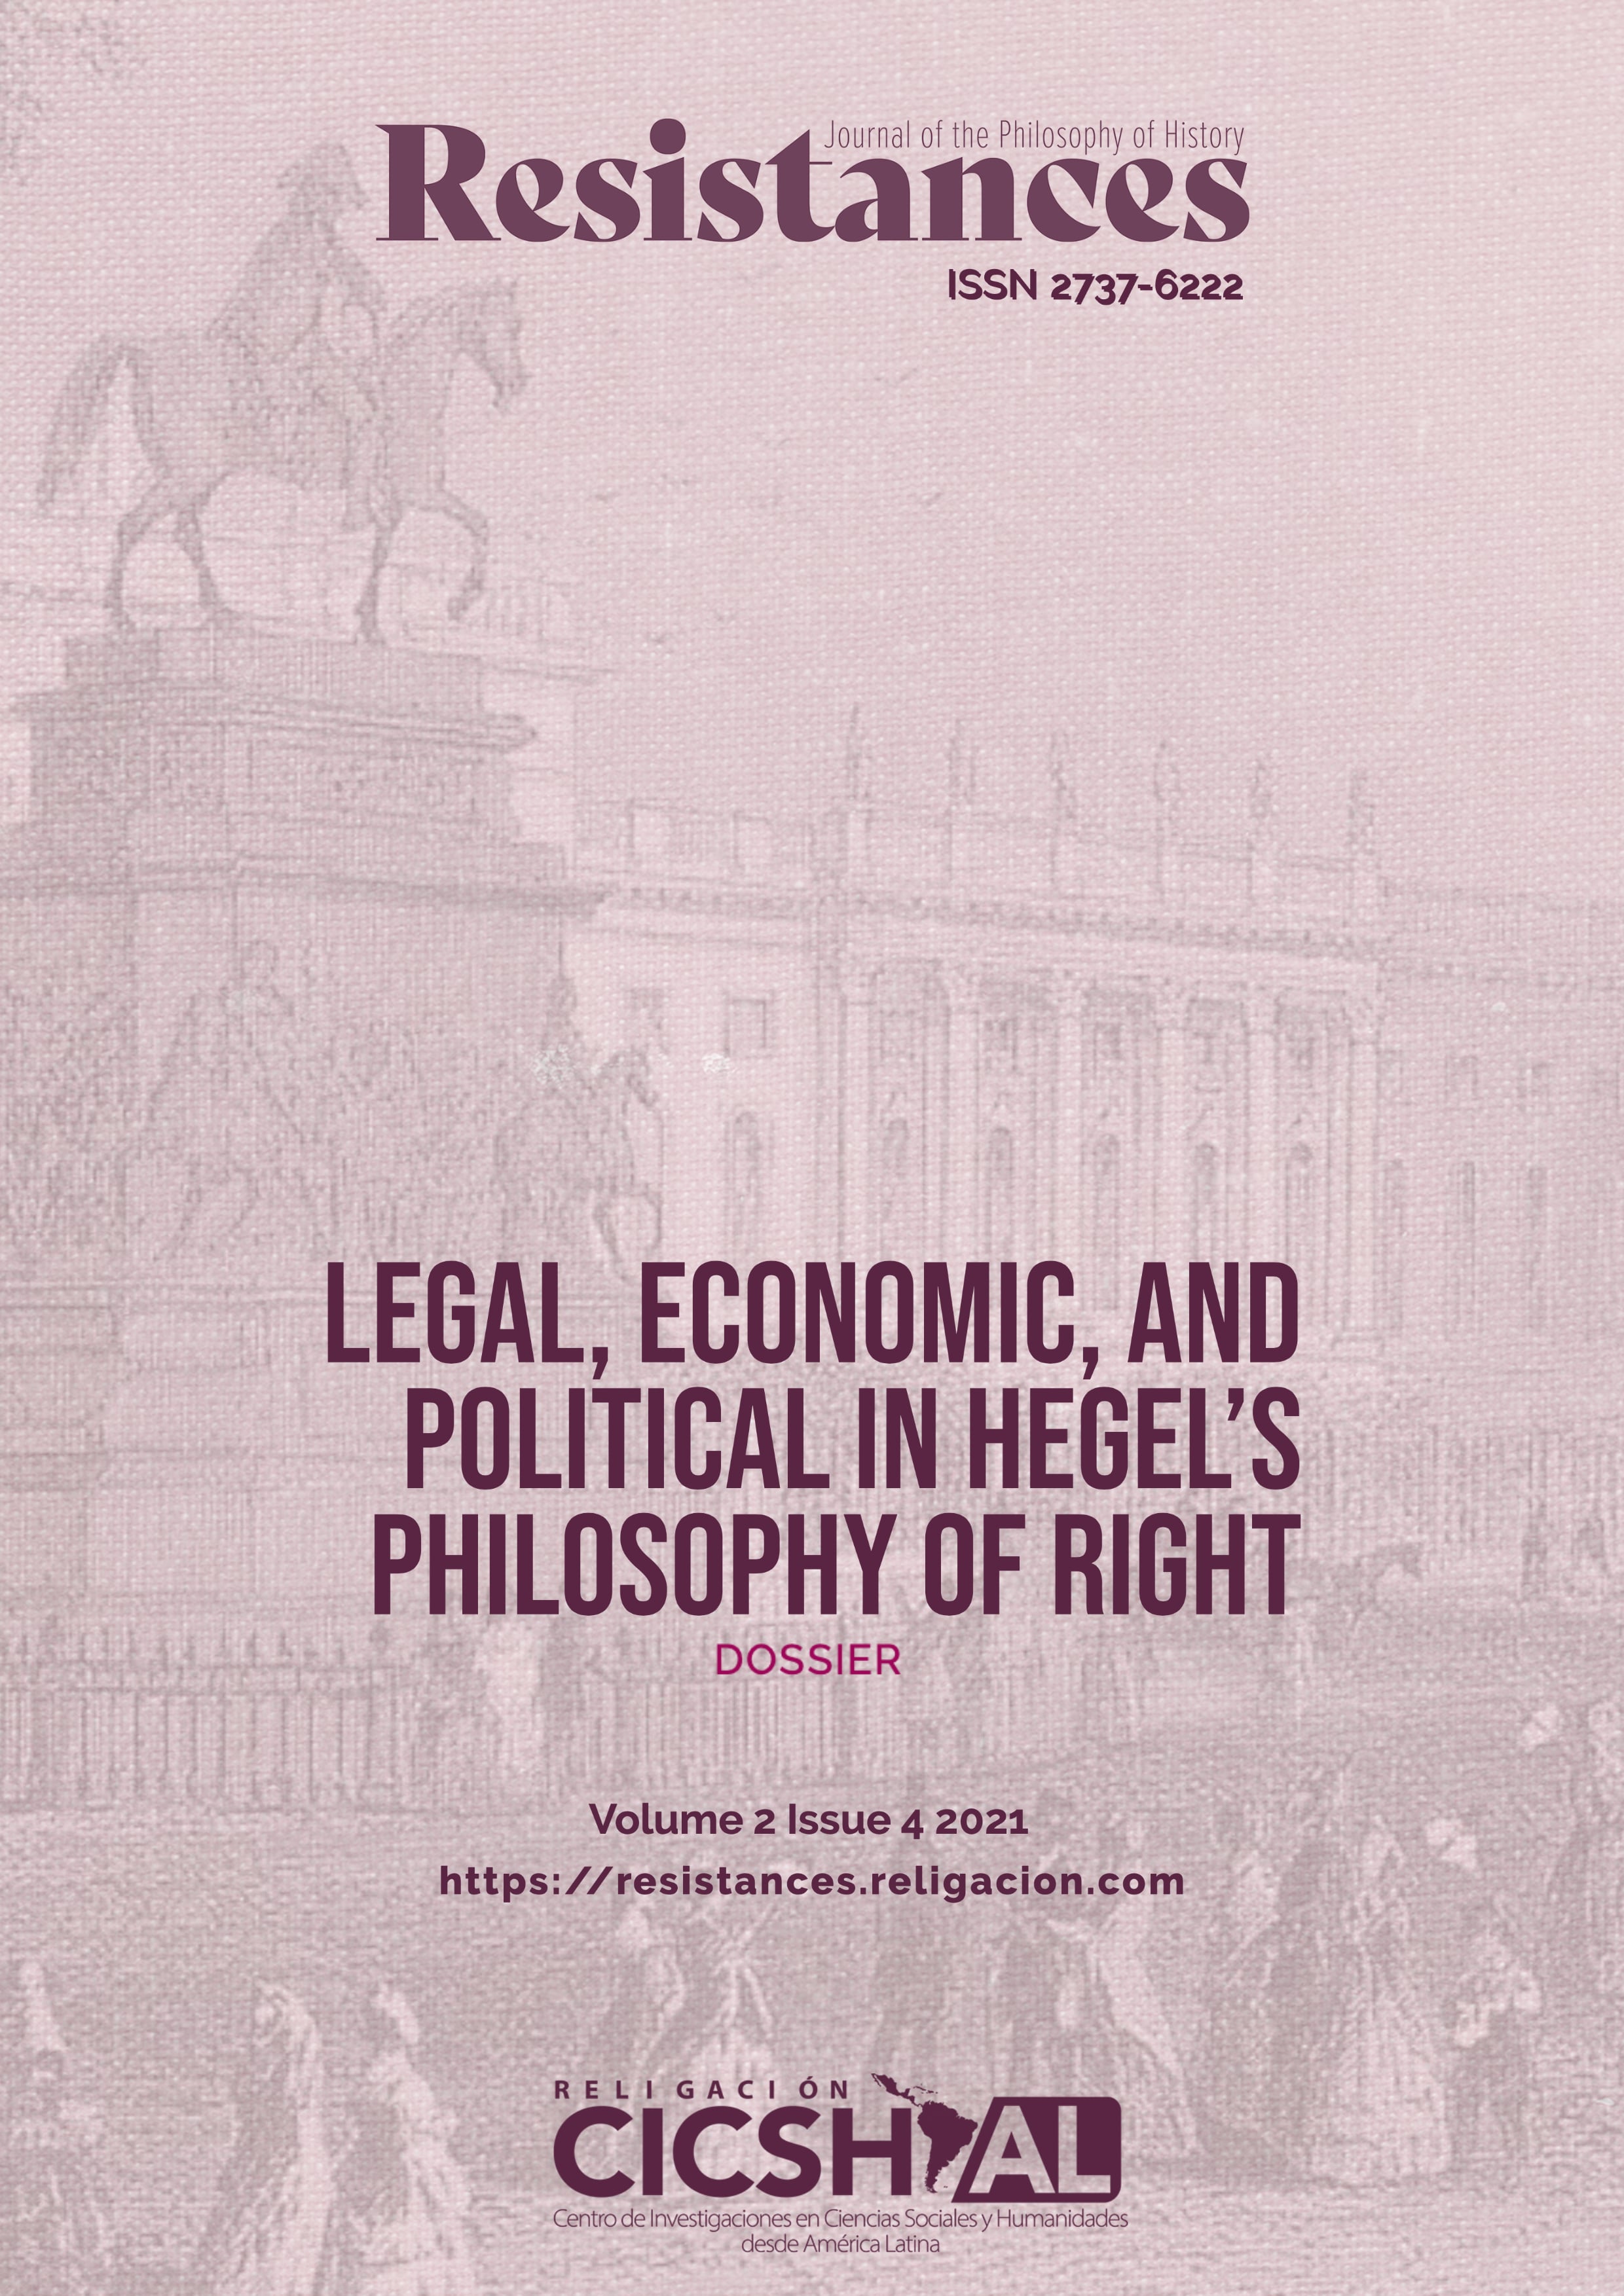 Dossier | Legal, Economic, and Political in Hegel's Philosophy of Right